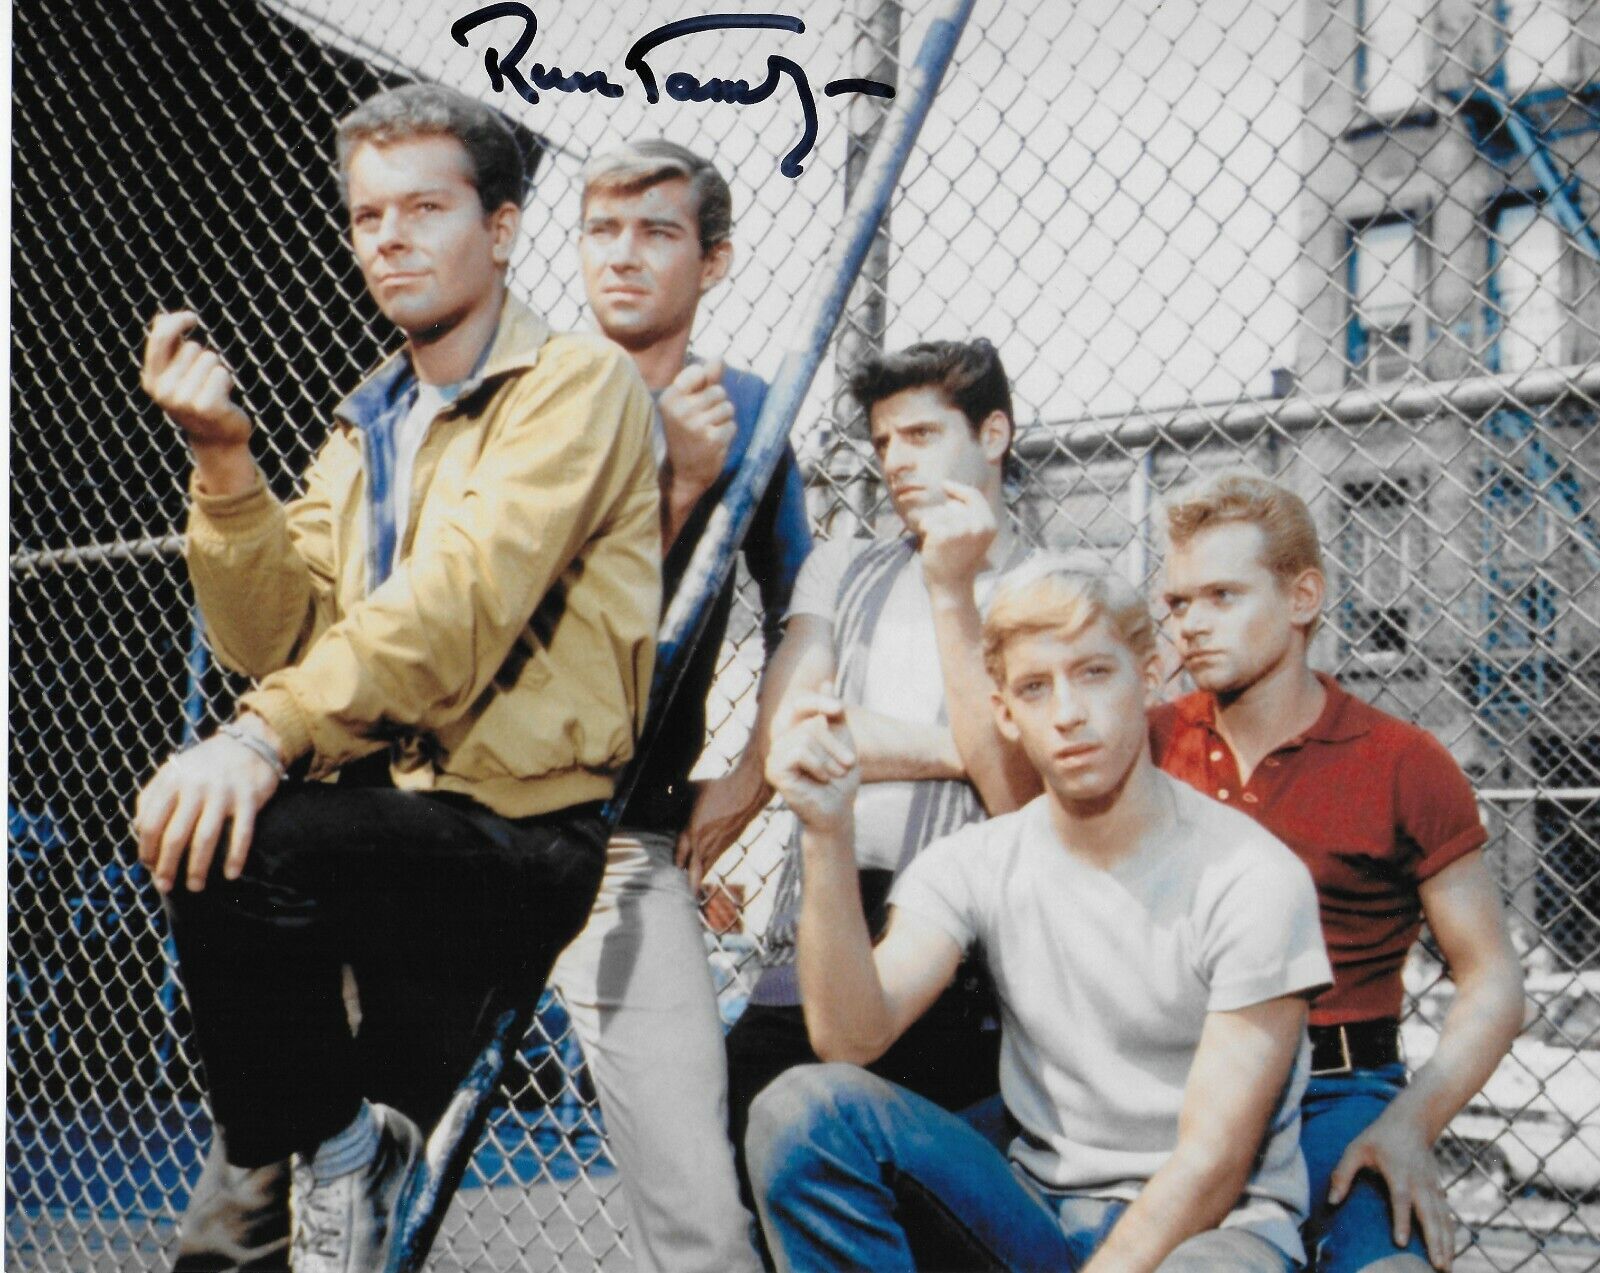 Russ Tamblyn West Side Story Original Autographed 8X10 Photo Poster painting #11